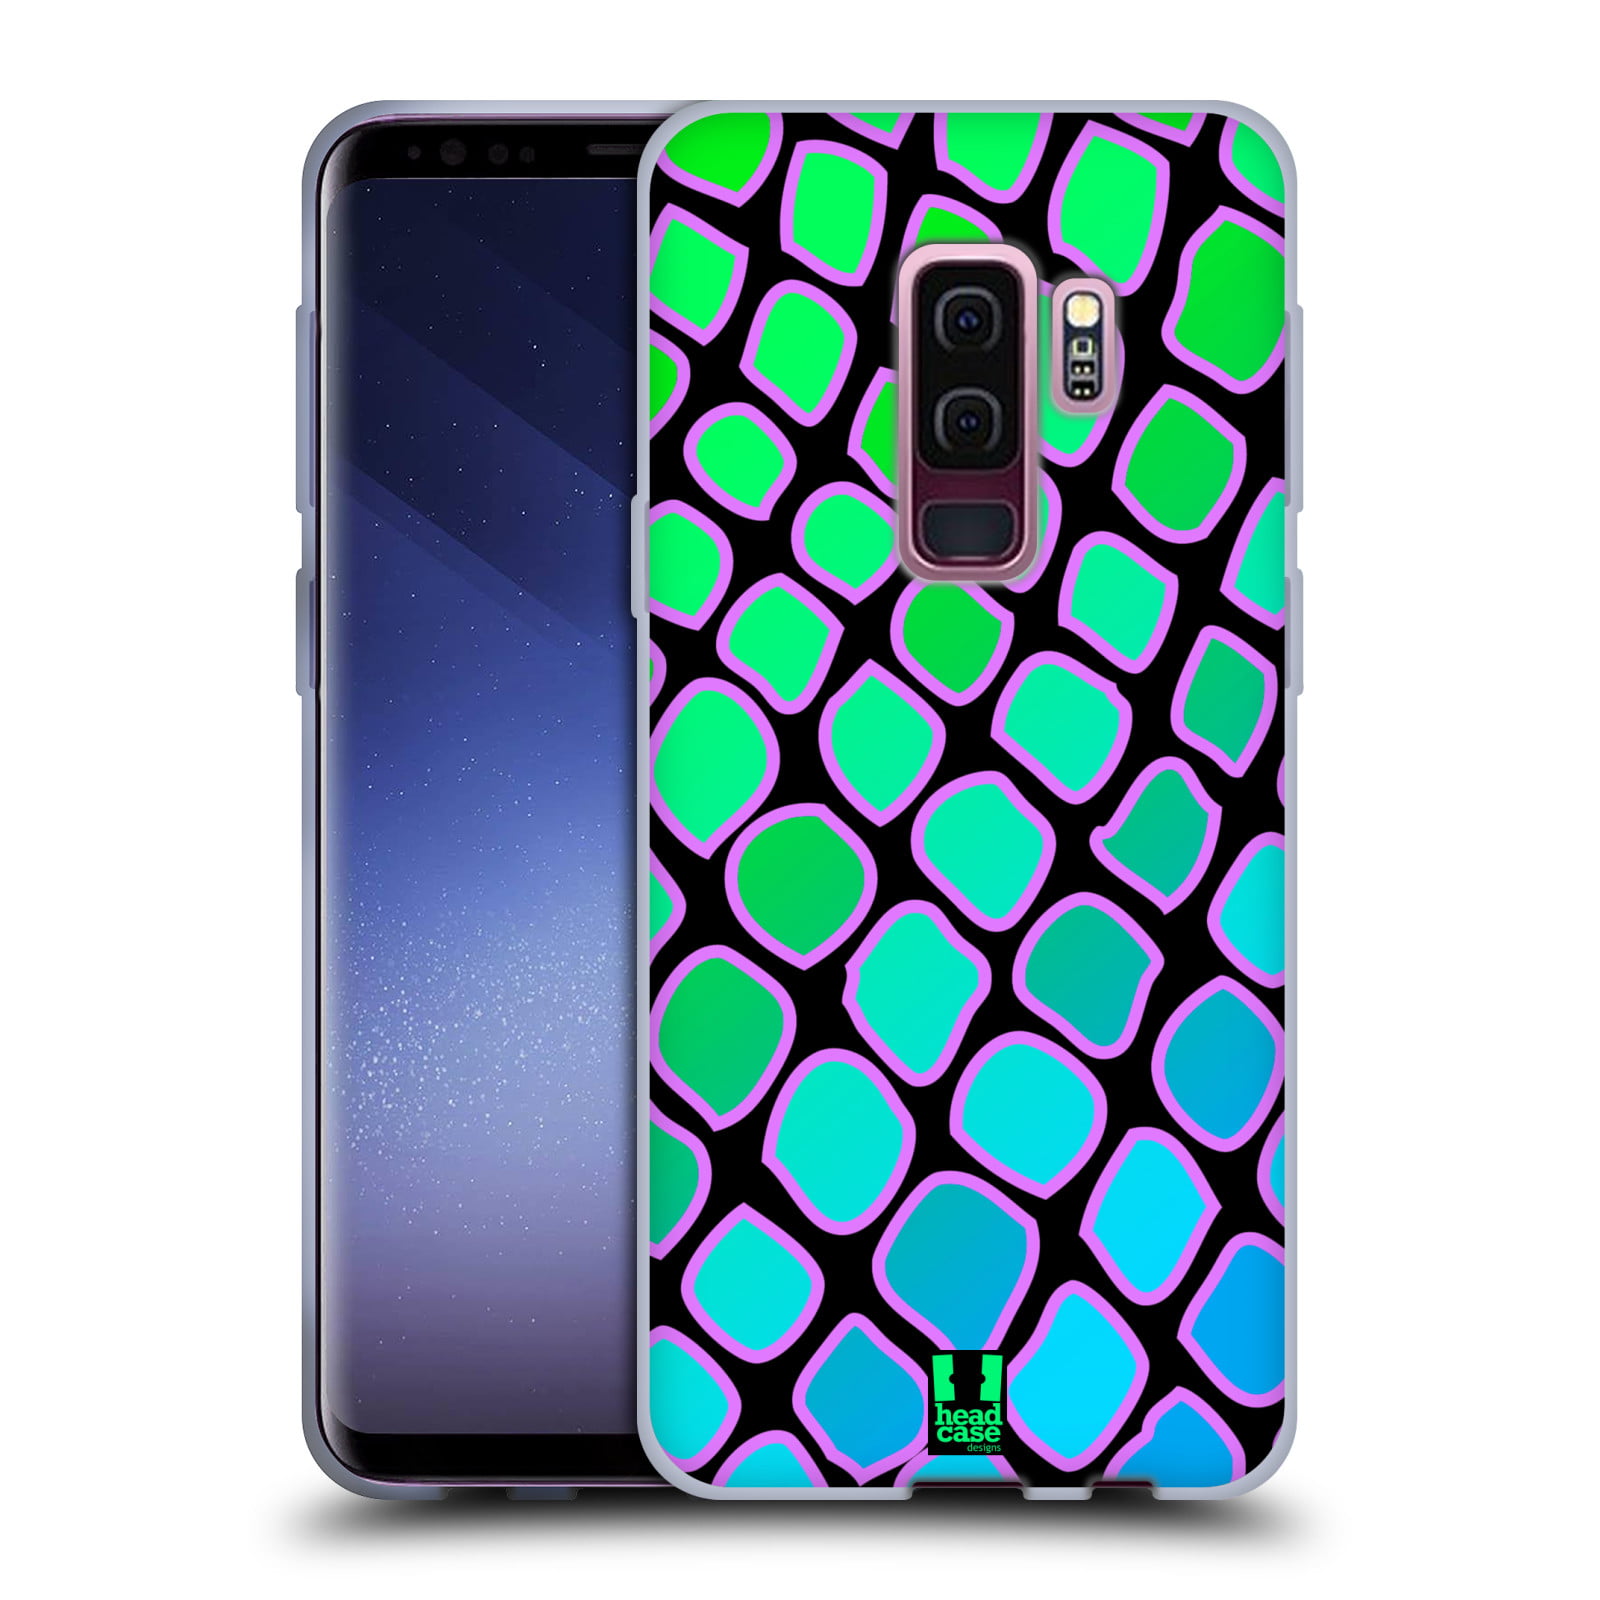 Head Case Designs Honeycomb Bees Soft Gel Case Compatible With Xiaomi Redmi 9A Redmi 9AT 